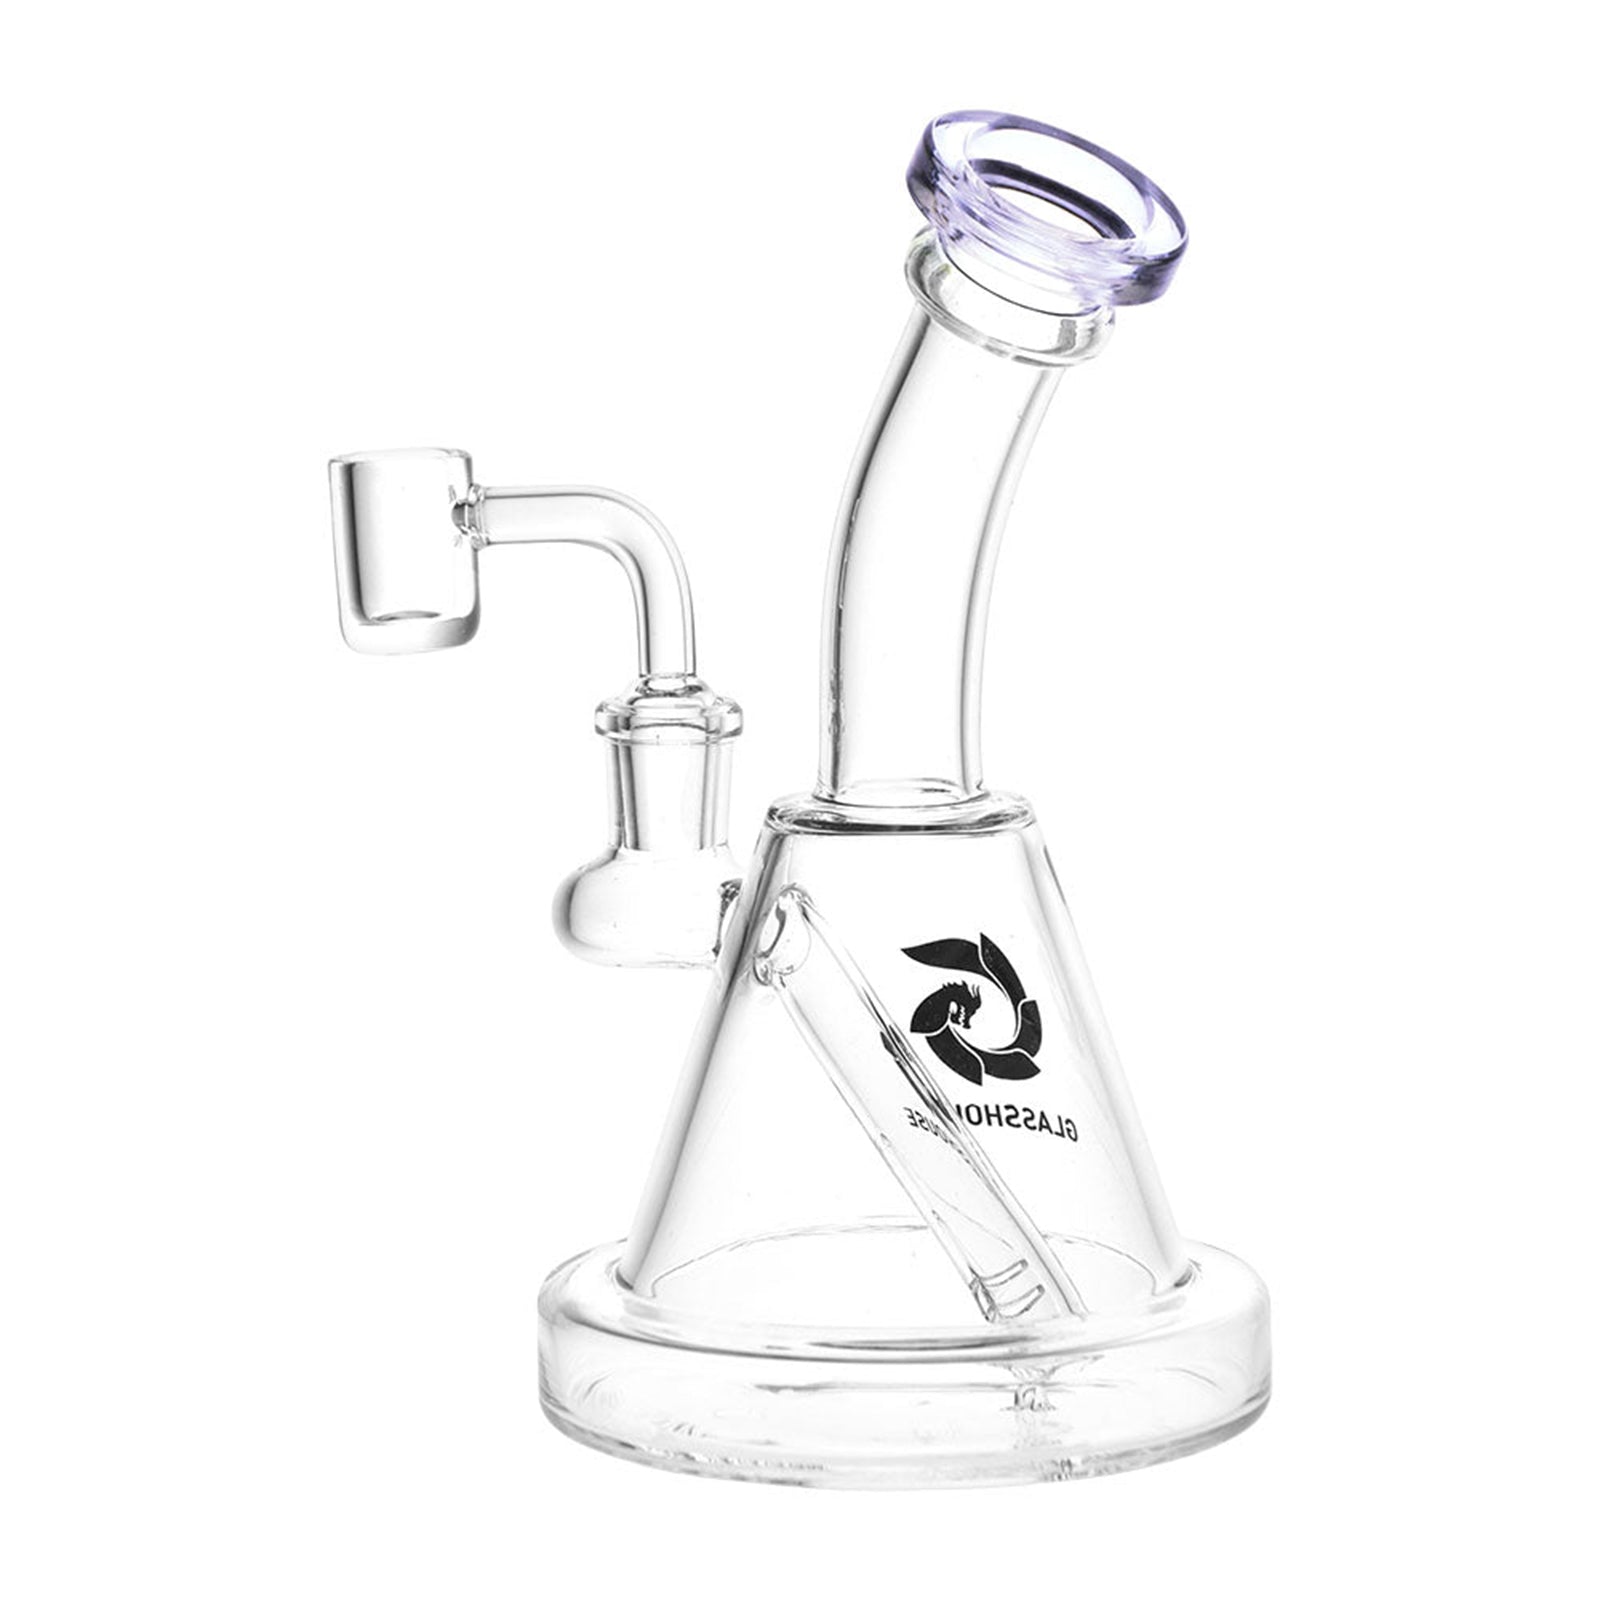 Bent Neck Glass Dab Rig - PILOTDIARY